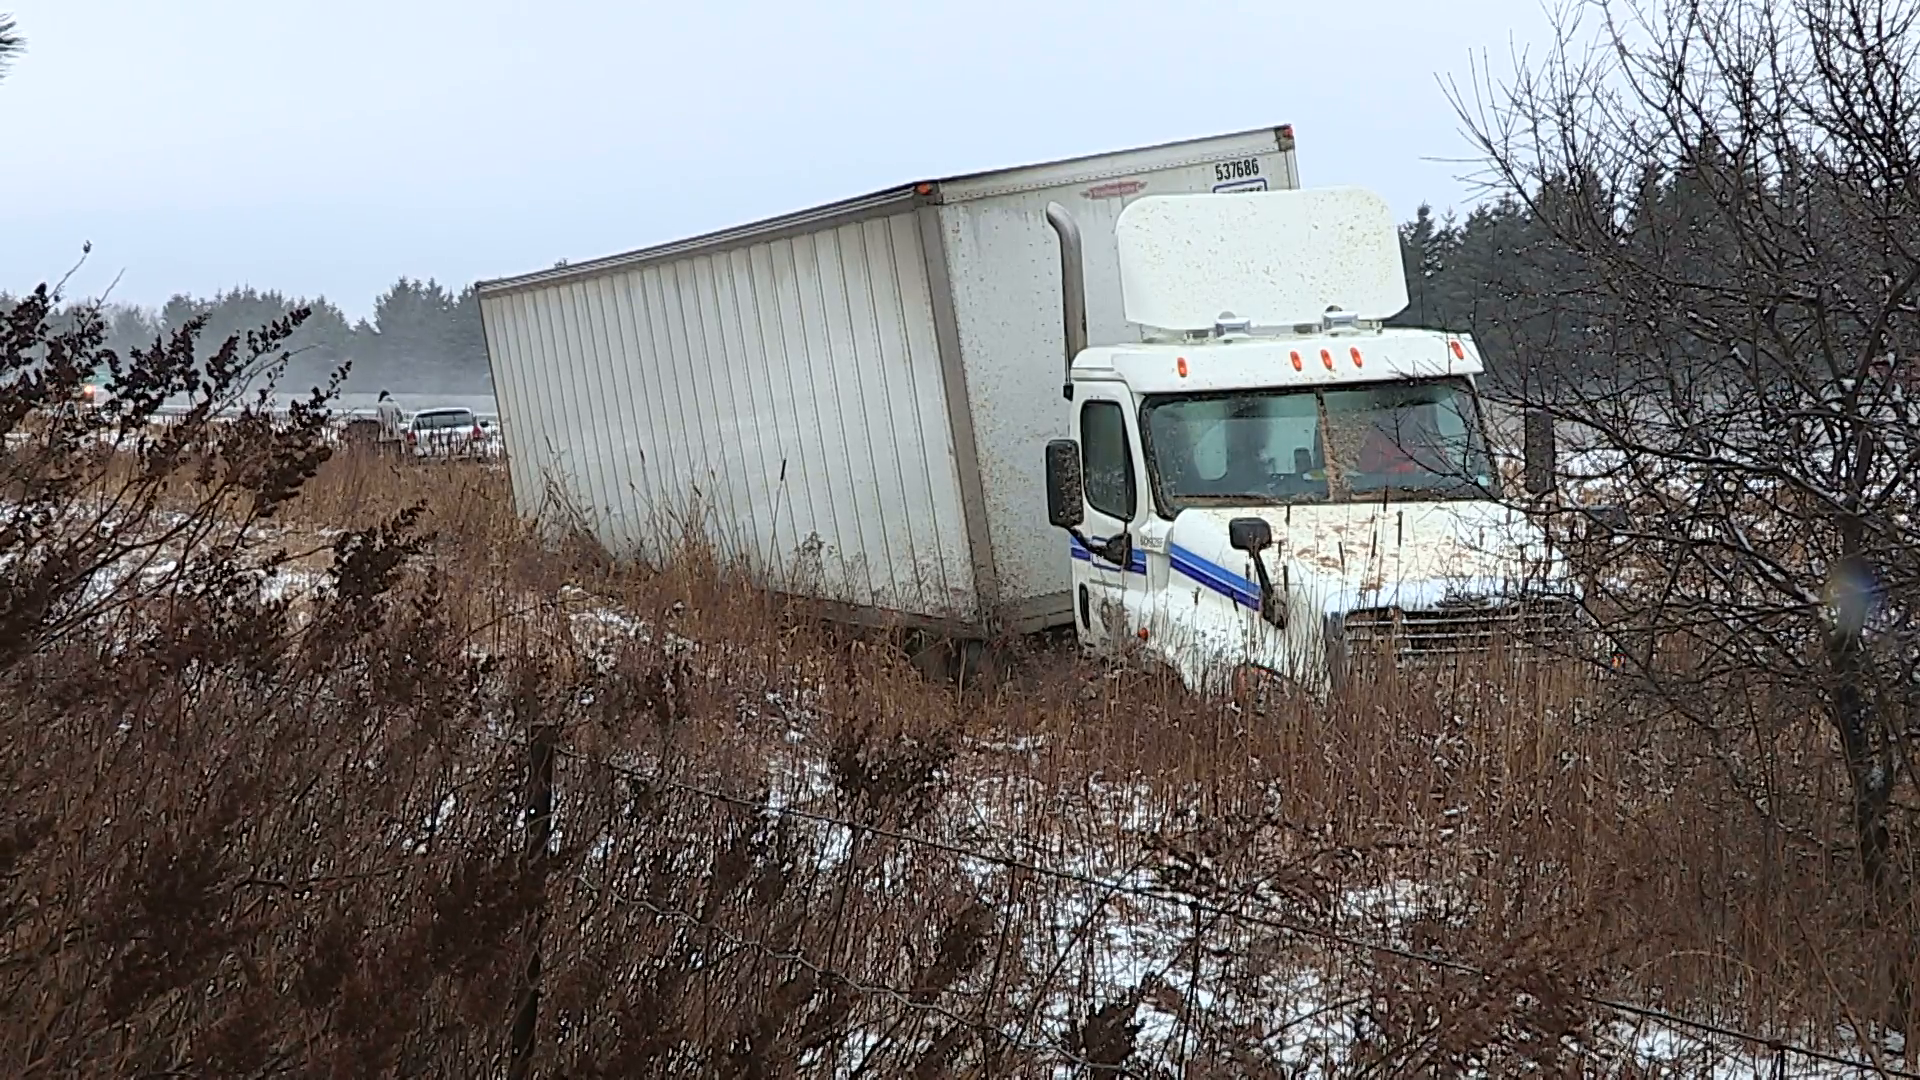 Tractor trailer truck crash and in ditch on icy road after blizzard ...